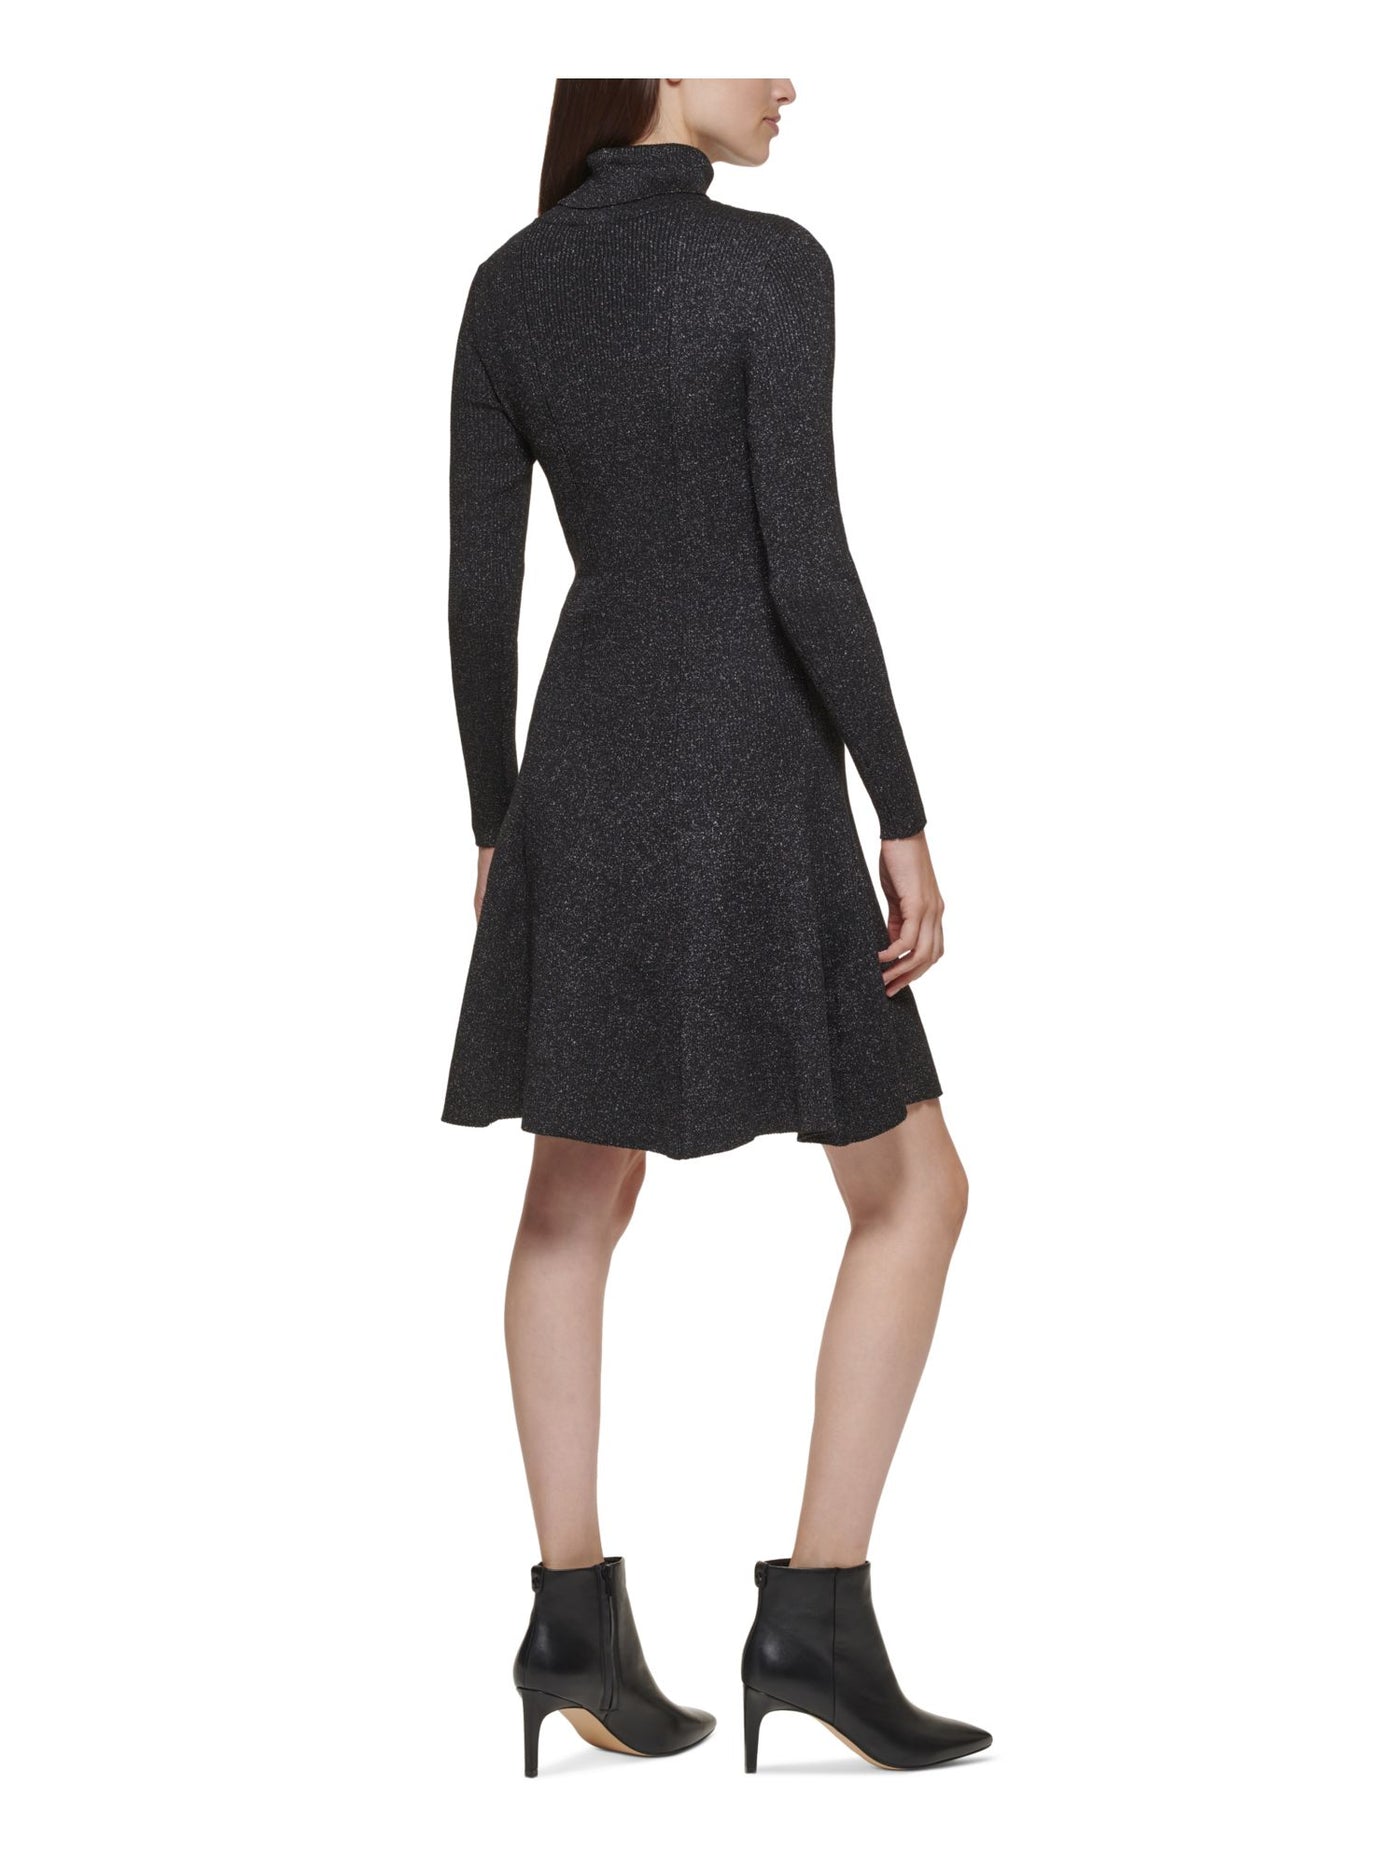 CALVIN KLEIN Womens Black Knit Long Sleeve Turtle Neck Above The Knee Party Fit + Flare Dress Petites PXL